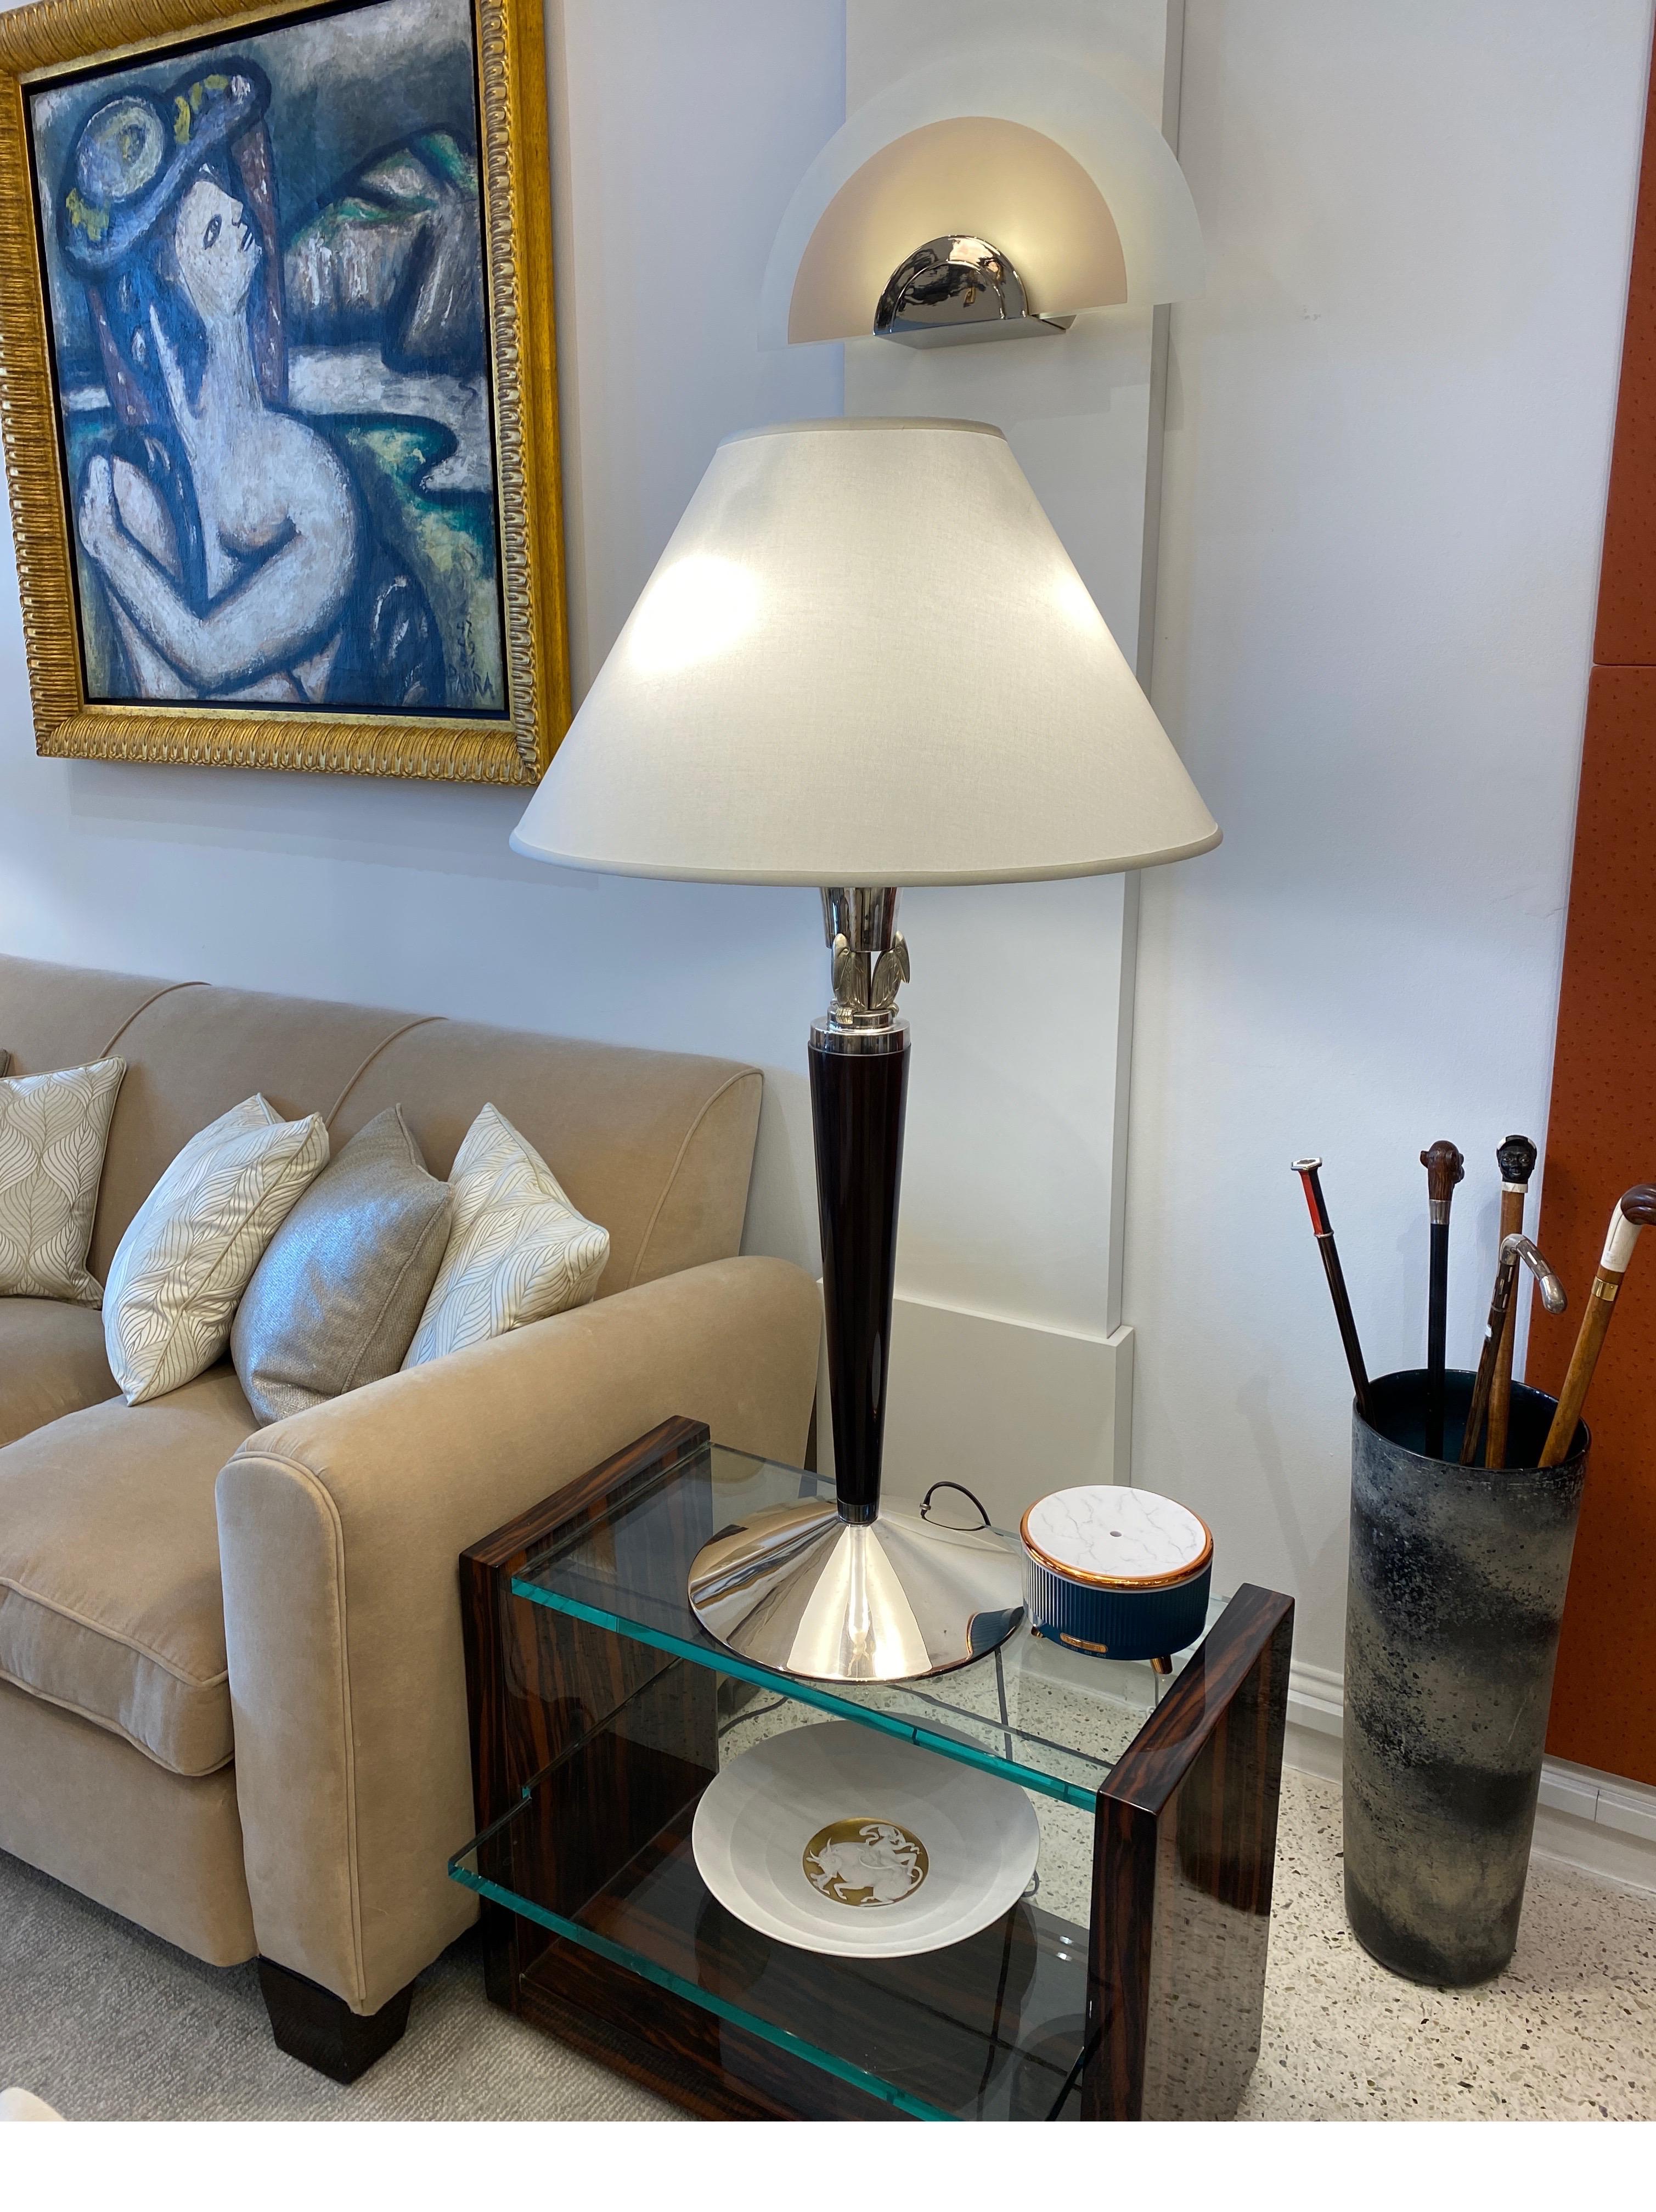 Pair of magnificent large scale French Art Deco table lamps by Atelier Petitot consisting of silver plated metal, rosewood shaft and 3 silver plated bronze exotic birds sculptures on the base of the bulb. Silk Shades.
Bronze maker Antonin Petitot